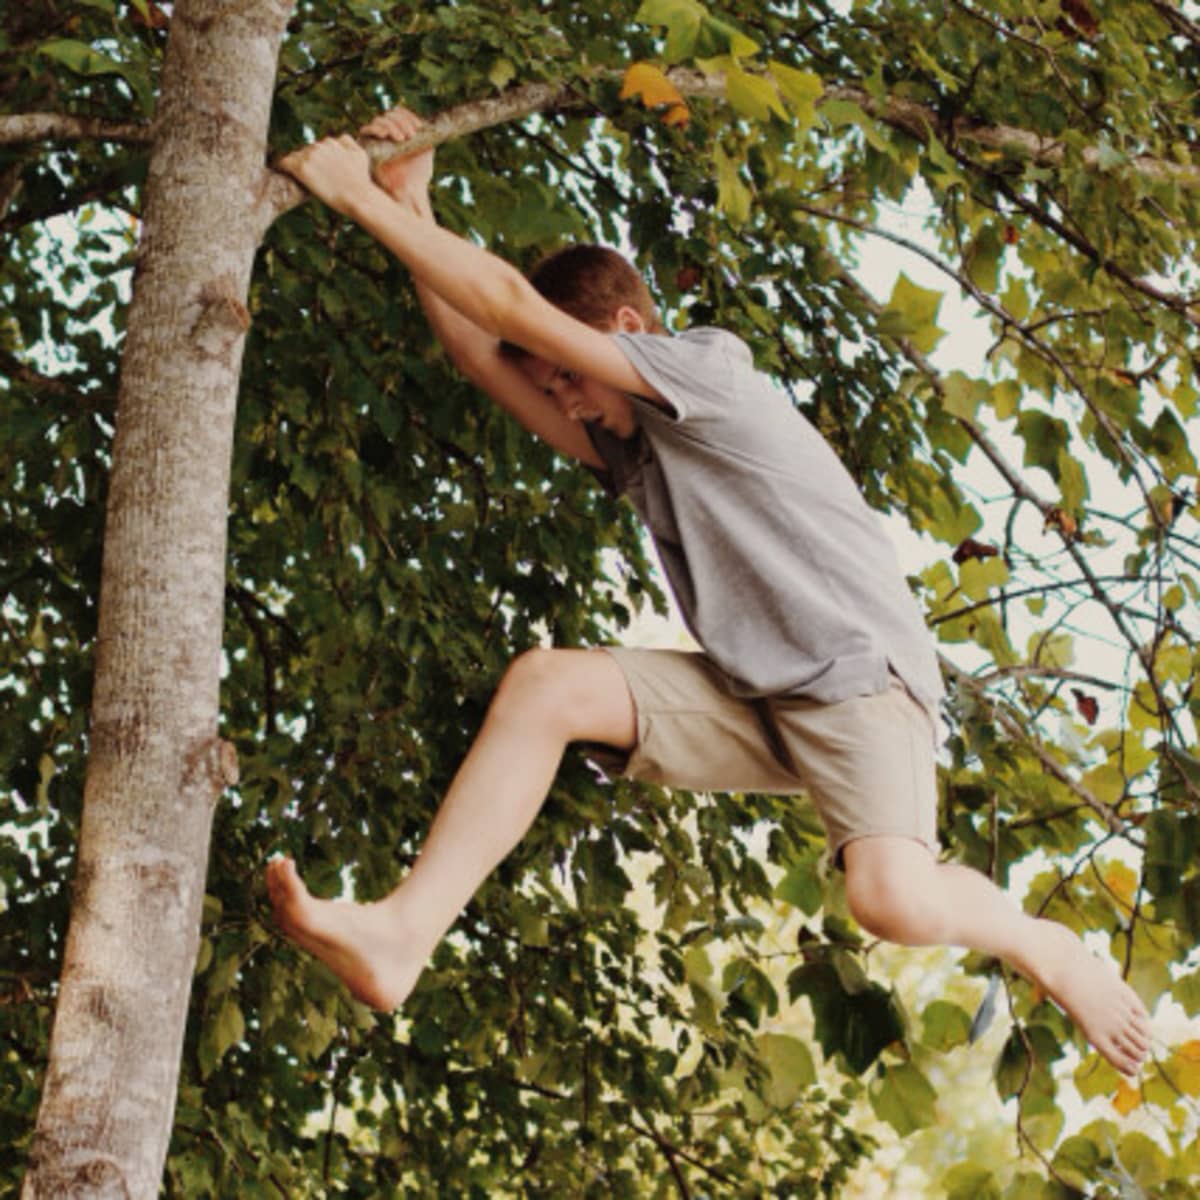 Climbing Trees Help to Build Confidence to Face Life's Challenges